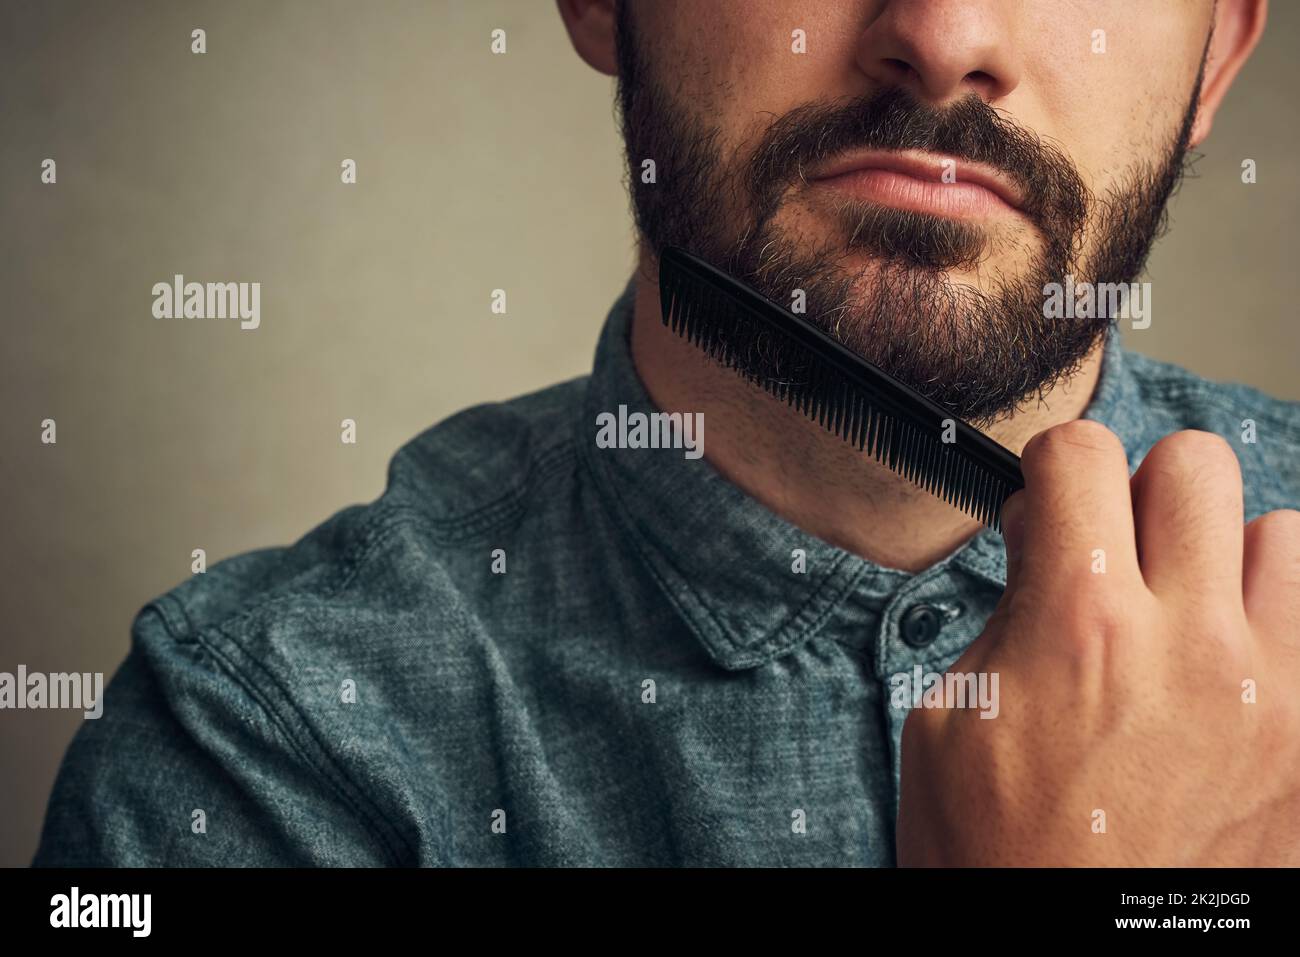 They cant resist the beard. Cropped shot of a handsome young man combing his beard against a grey background. Stock Photo